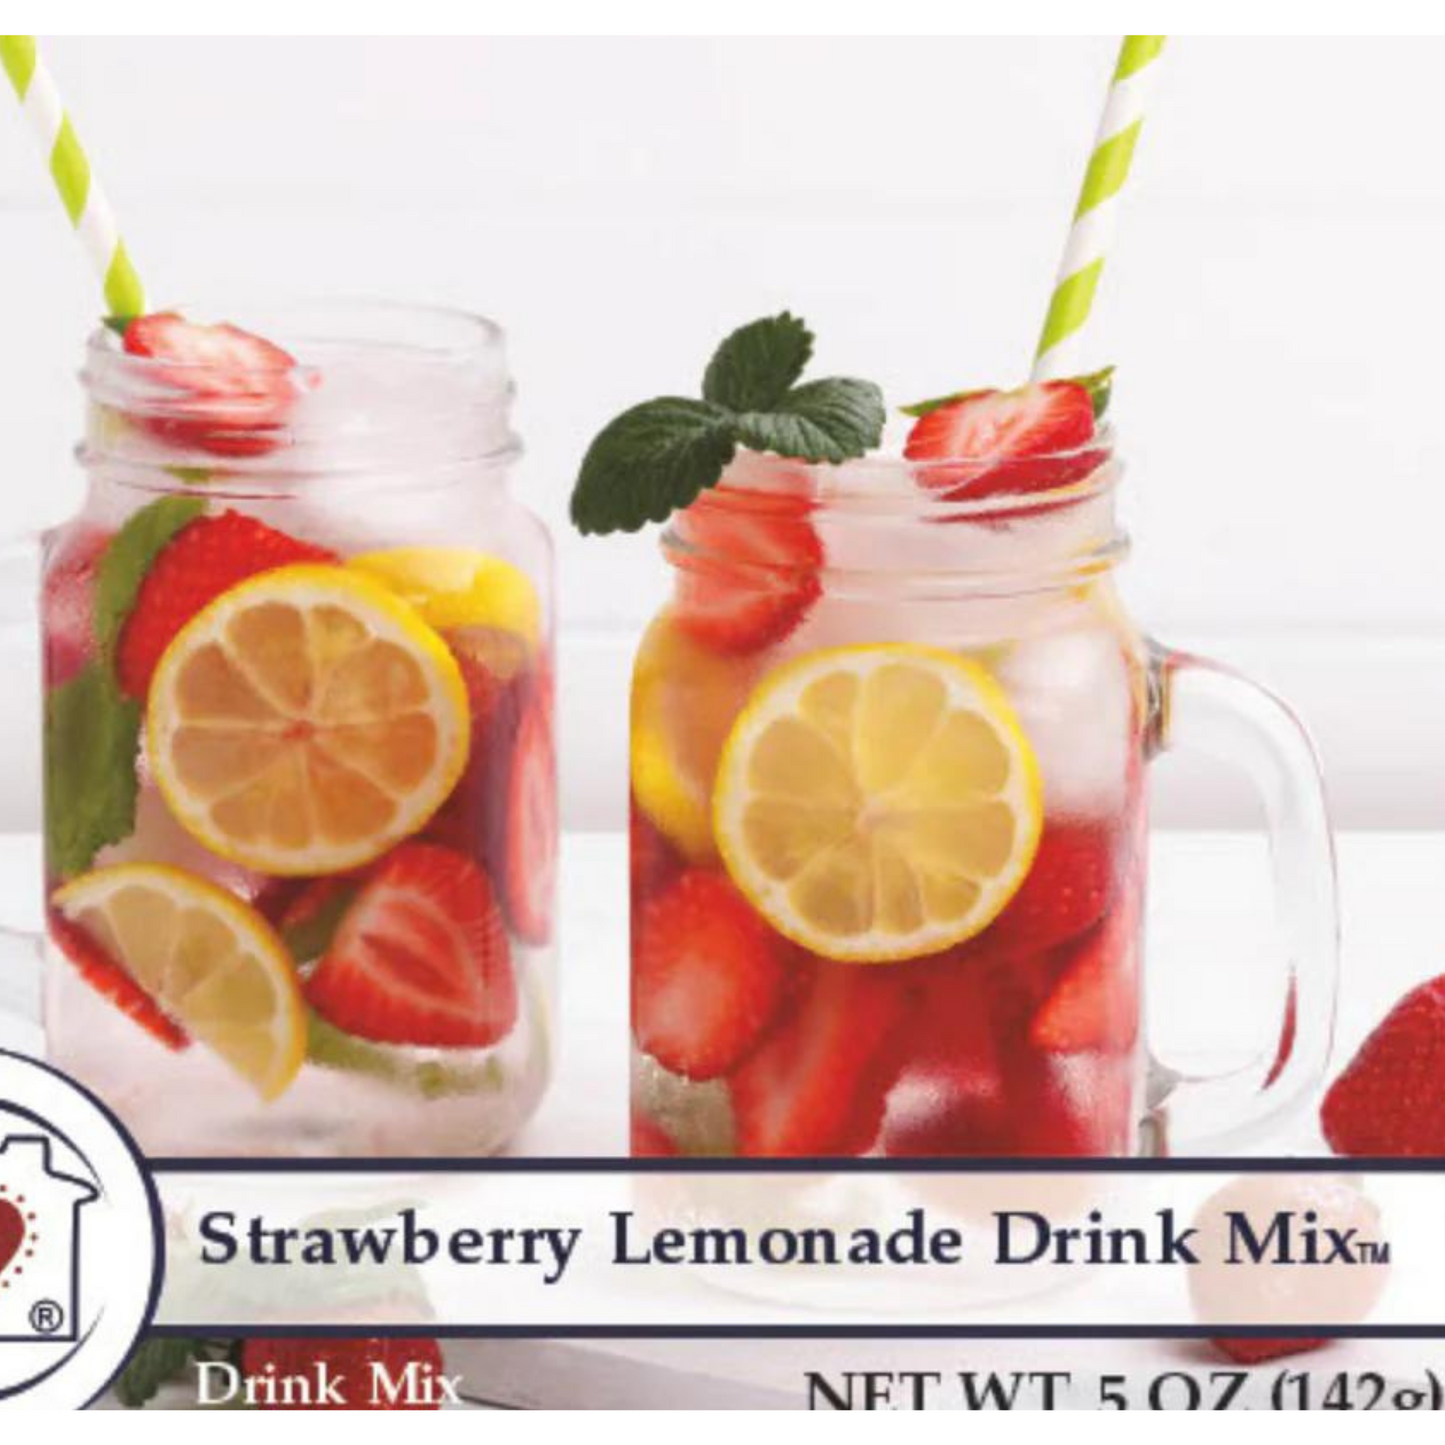 Cool down those hot summer days with a glass of lemonade like grandma used to make! This refreshing drink mix tastes freshly squeezed and makes a half-gallon of ice-cold lemonade! Makes 1/2 gallon of lemonade. Simply add 2 quarts of cold water.  Gluten-Free Vegan